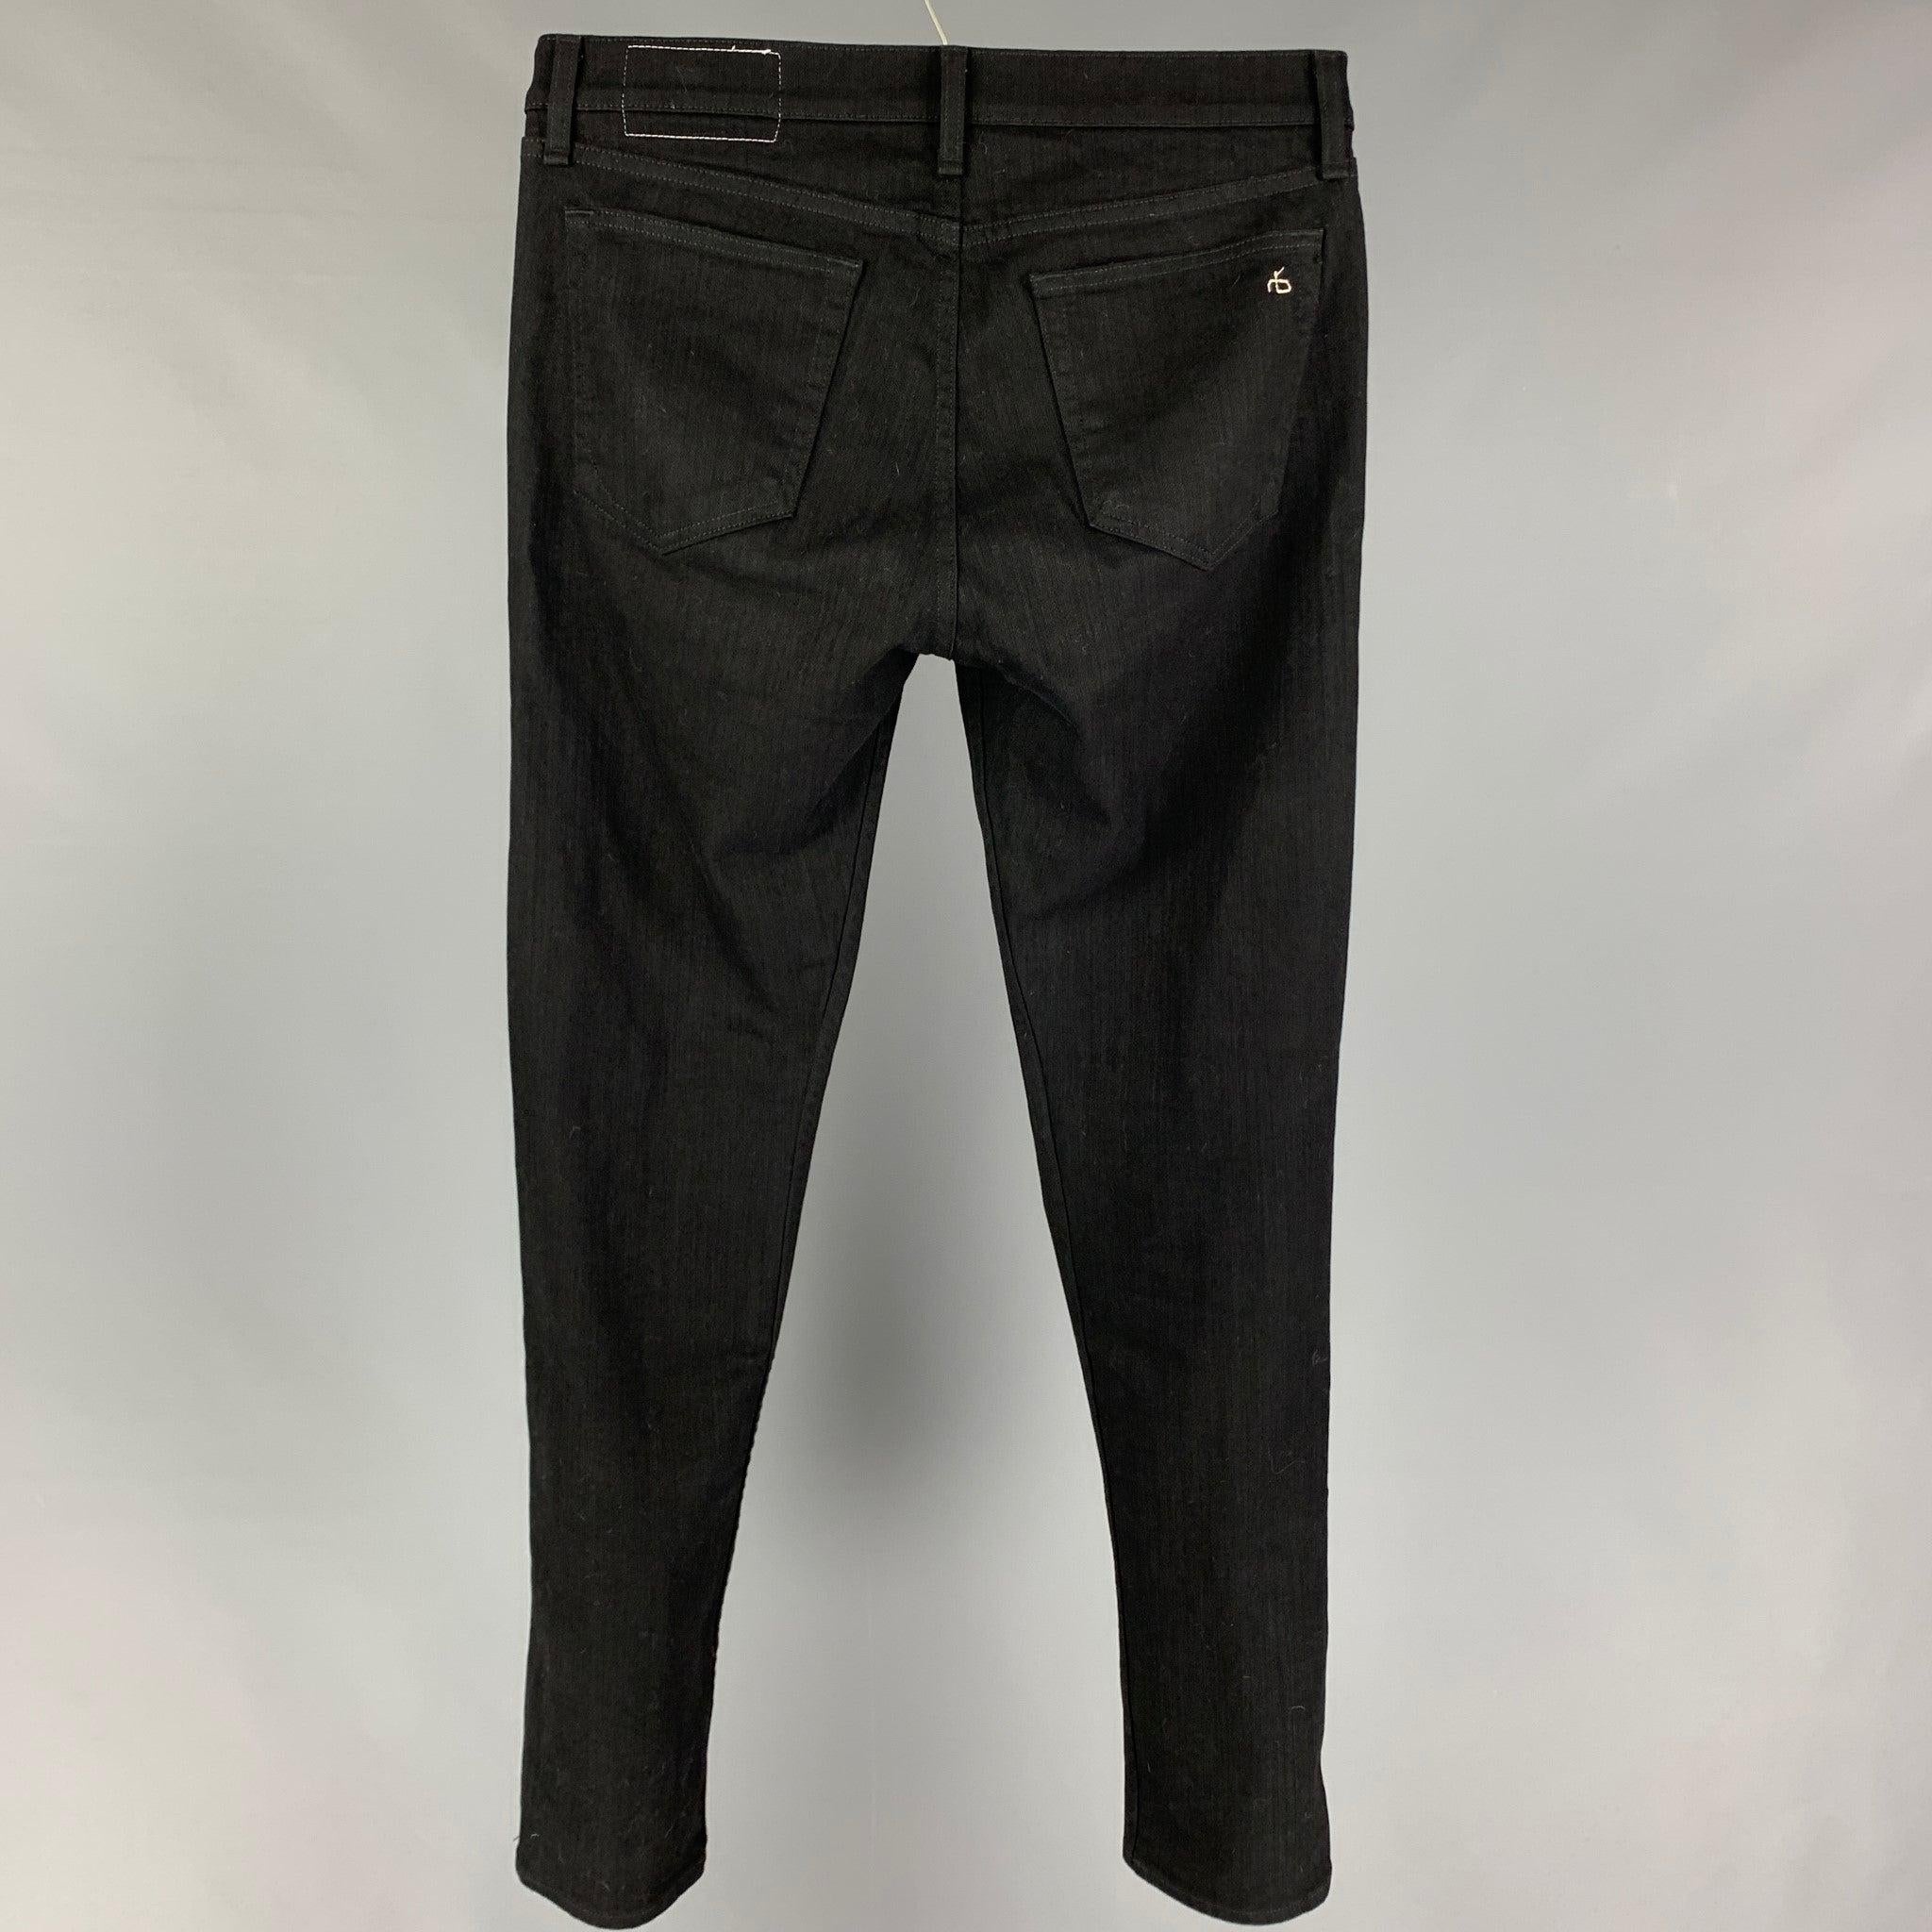 RAG & BONE jeans comes in a black cotton / polyurethane featuring a slim fit and a button fly closure.
Very Good
Pre-Owned Condition. 

Marked:   31  

Measurements: 
  Waist: 32 inches  Rise: 10 inches  Inseam: 34 inches 
  
  
 
Reference: